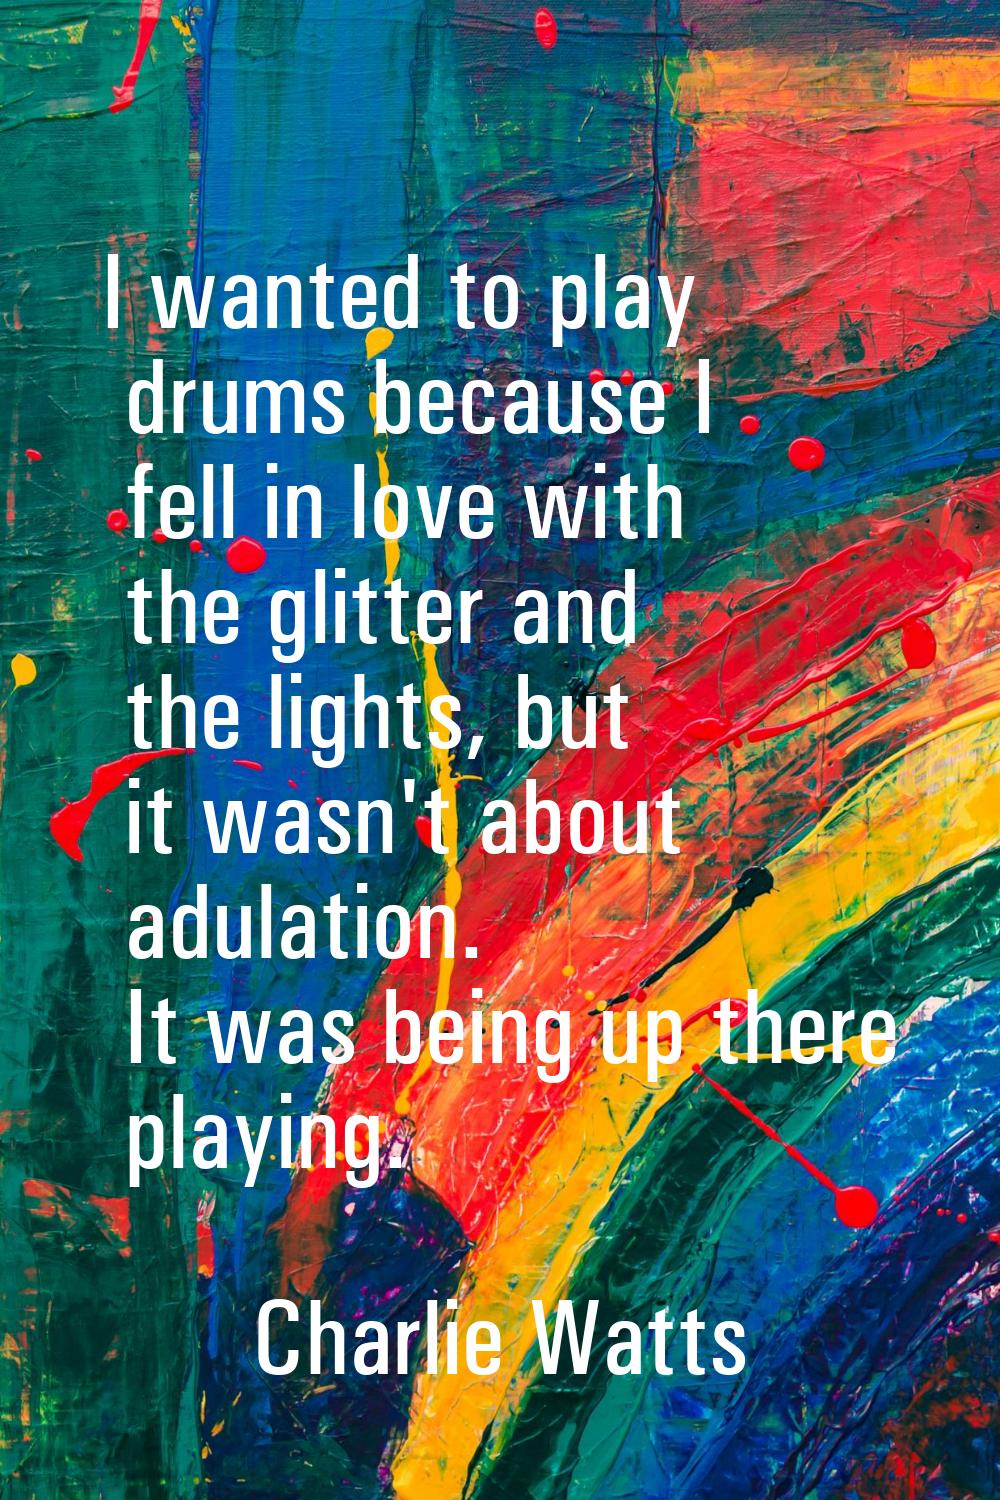 I wanted to play drums because I fell in love with the glitter and the lights, but it wasn't about 